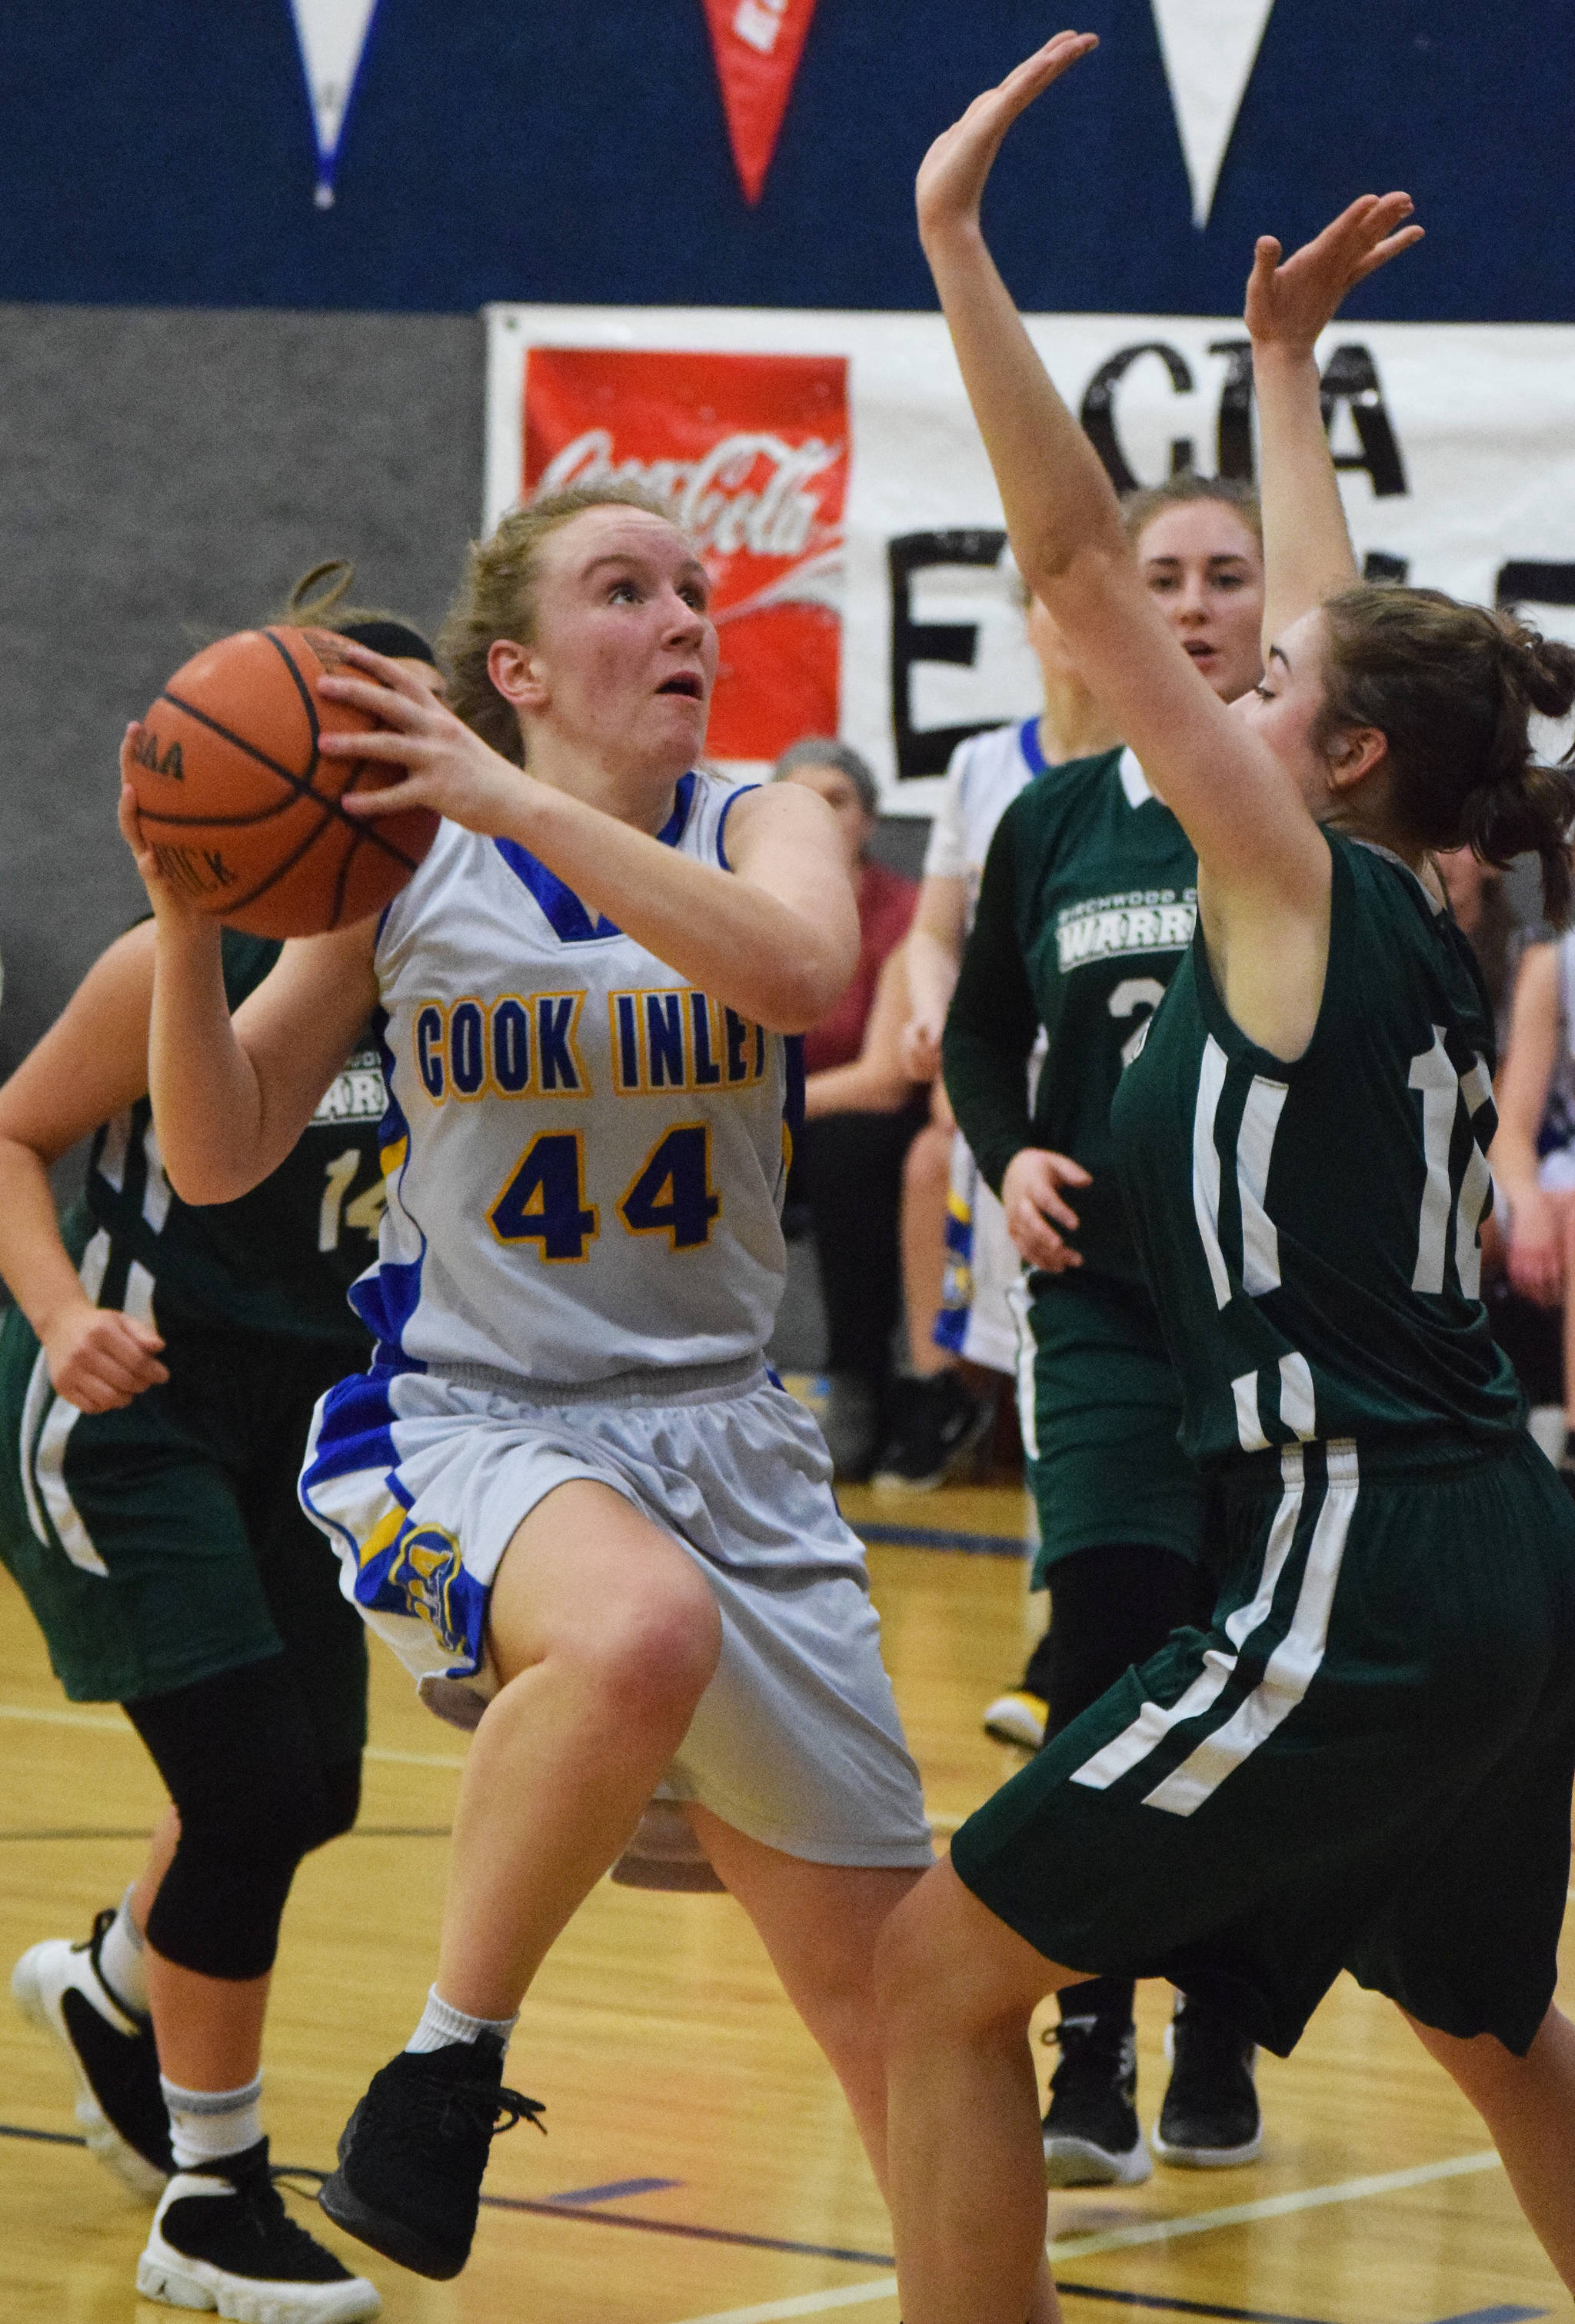 Cook Inlet Academy’s Adara Warren (44) steps back for a shot against a Birchwood Christian defender Wednesday at the 2019 Peninsula Conference championship tournament at Cook Inlet Academy in Soldotna. (Photo by Joey Klecka/Peninsula Clarion)